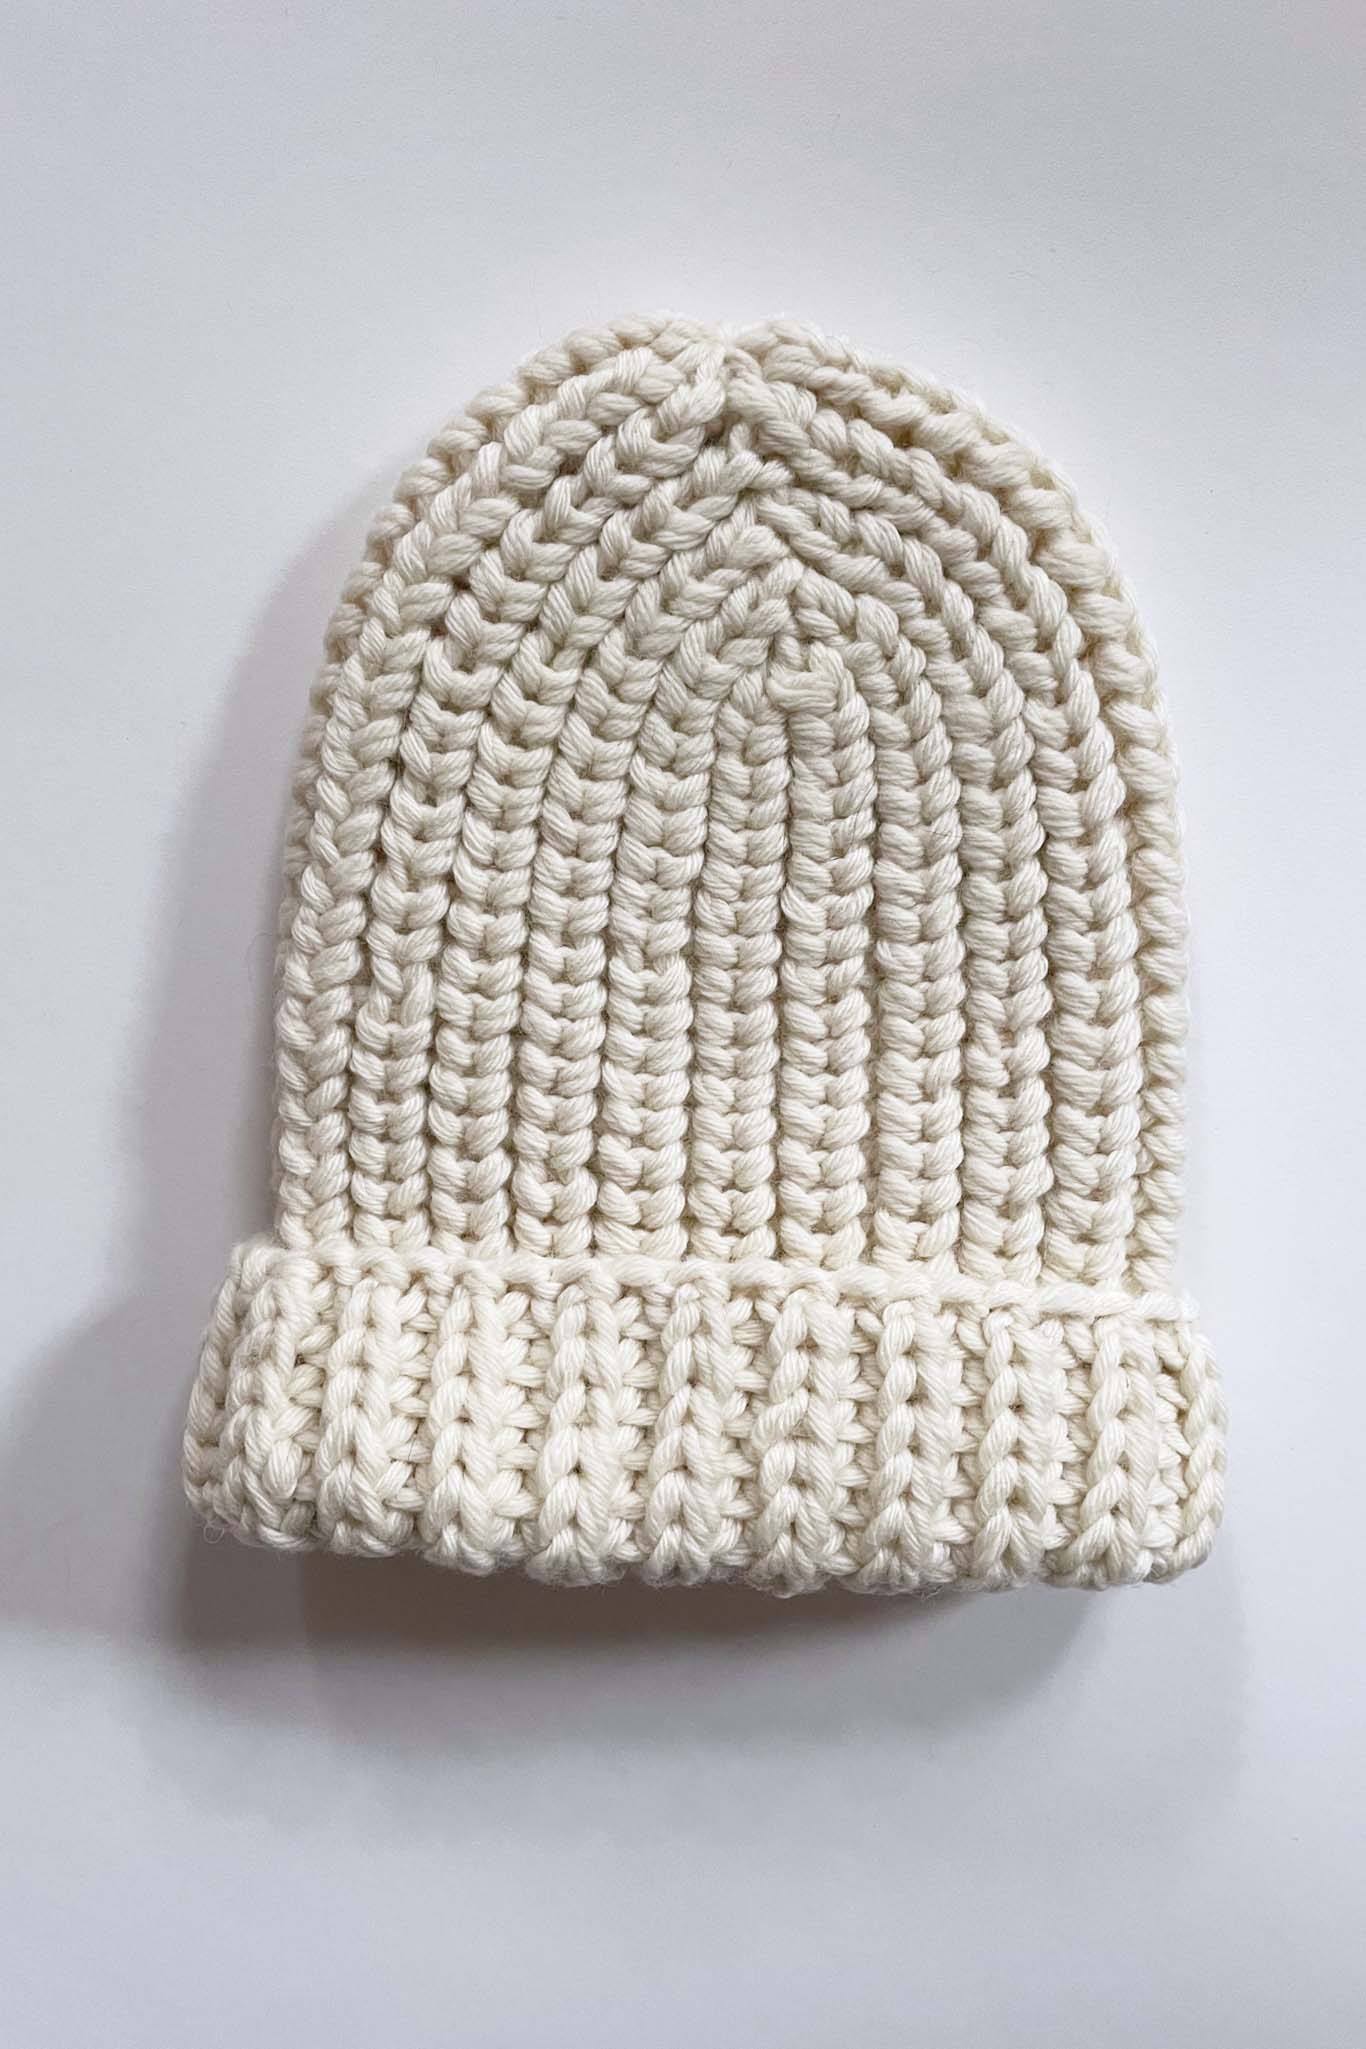 Hand knit wool hat perfect for fall and winter. Made in Perul